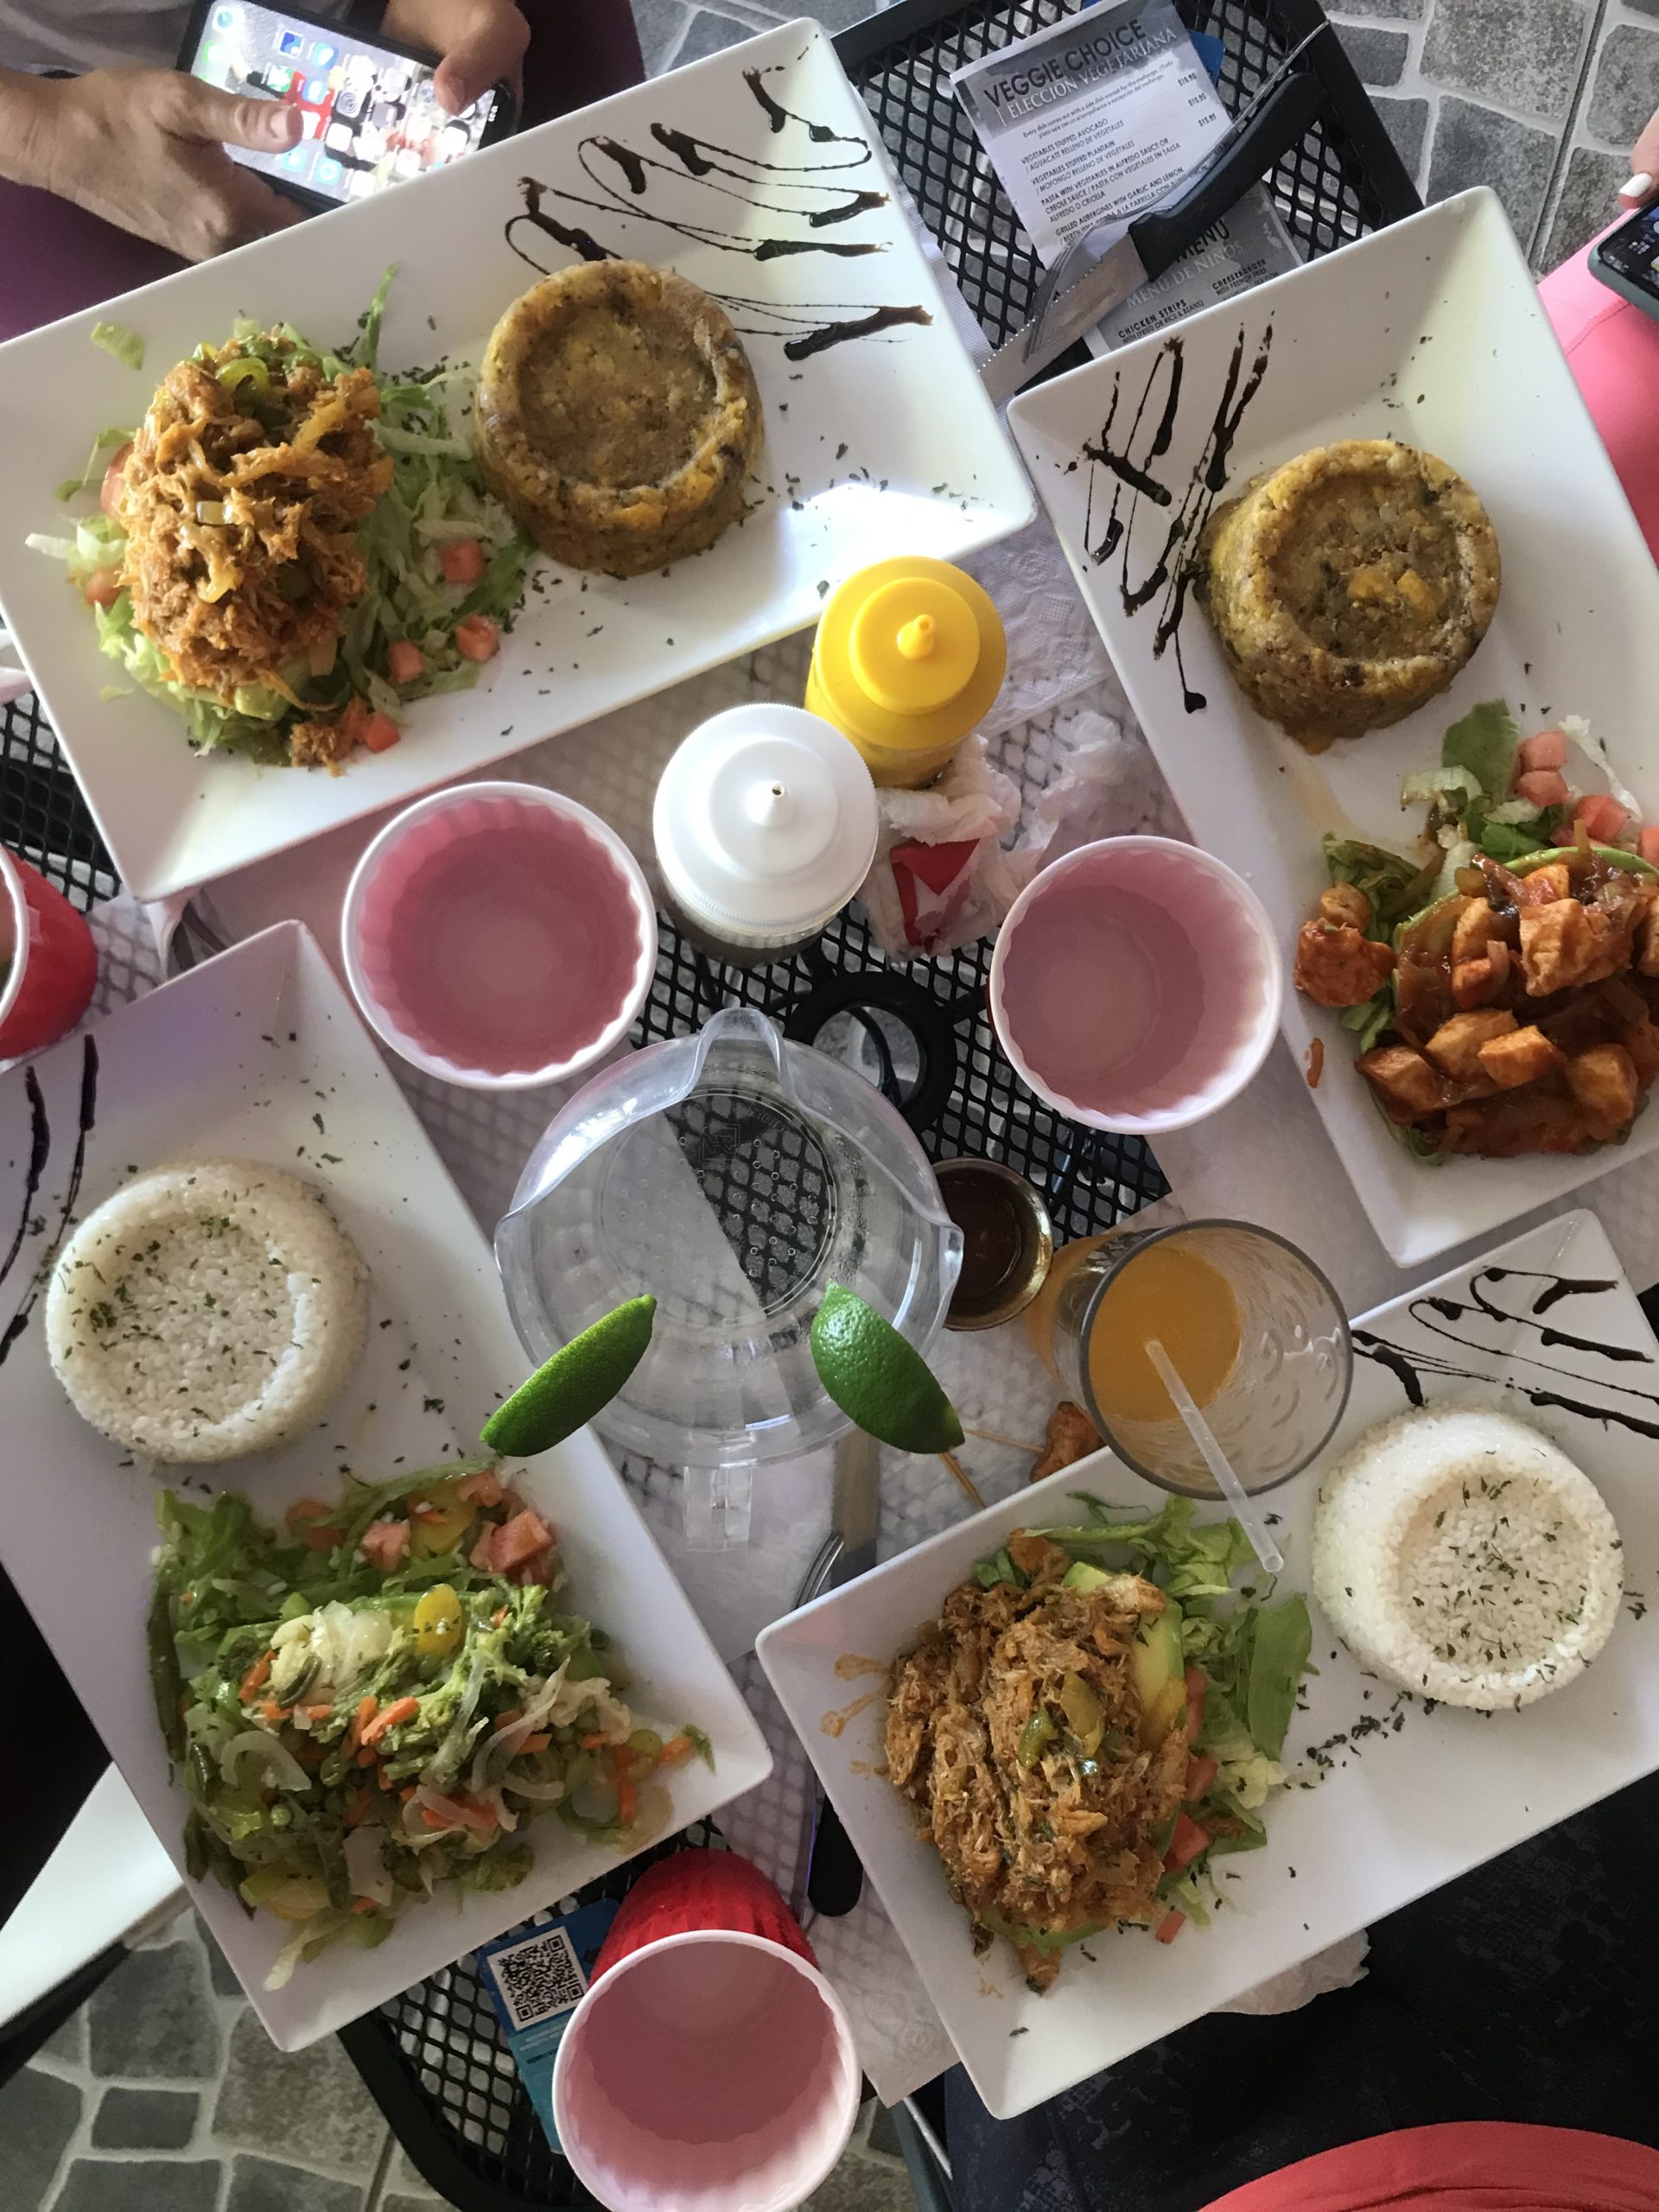 Puerto Rico, things to do in San Juan, best puerto rican food, what to eat in puerto rico, mofongo, stuffed avocado, coconut rice from Edelweiss, Kioskos Luquillo, girls trip to san Juan